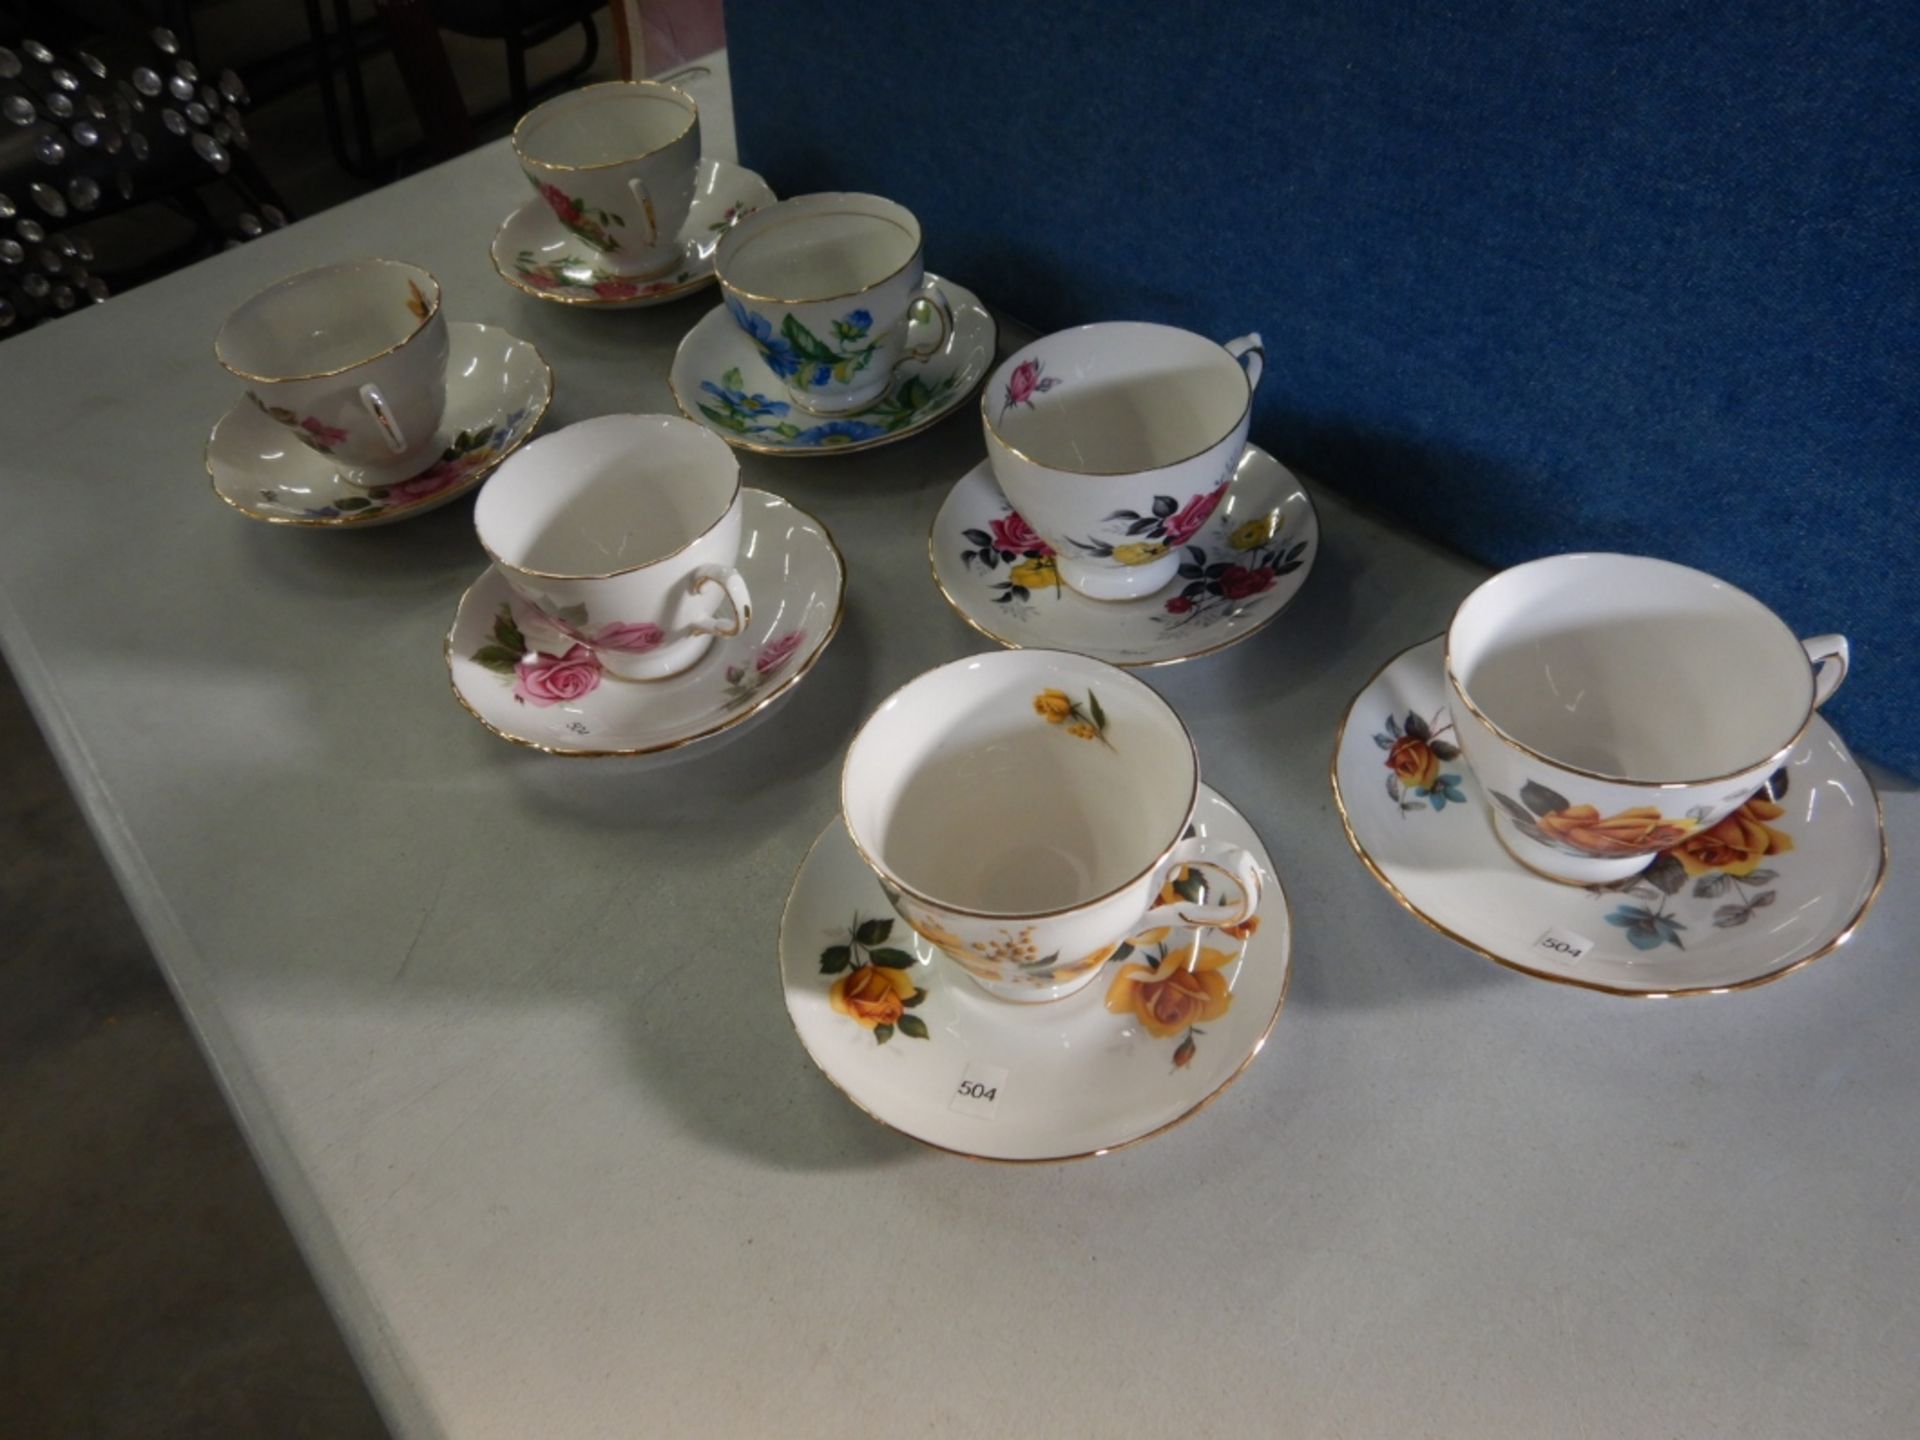 ANTIQUE TEACUPS & SAUCERS - MADE IN ENGLAND - LOT OF 7 - BONE CHINA #8273 - YELLOW FLOWERS, # - Image 2 of 33